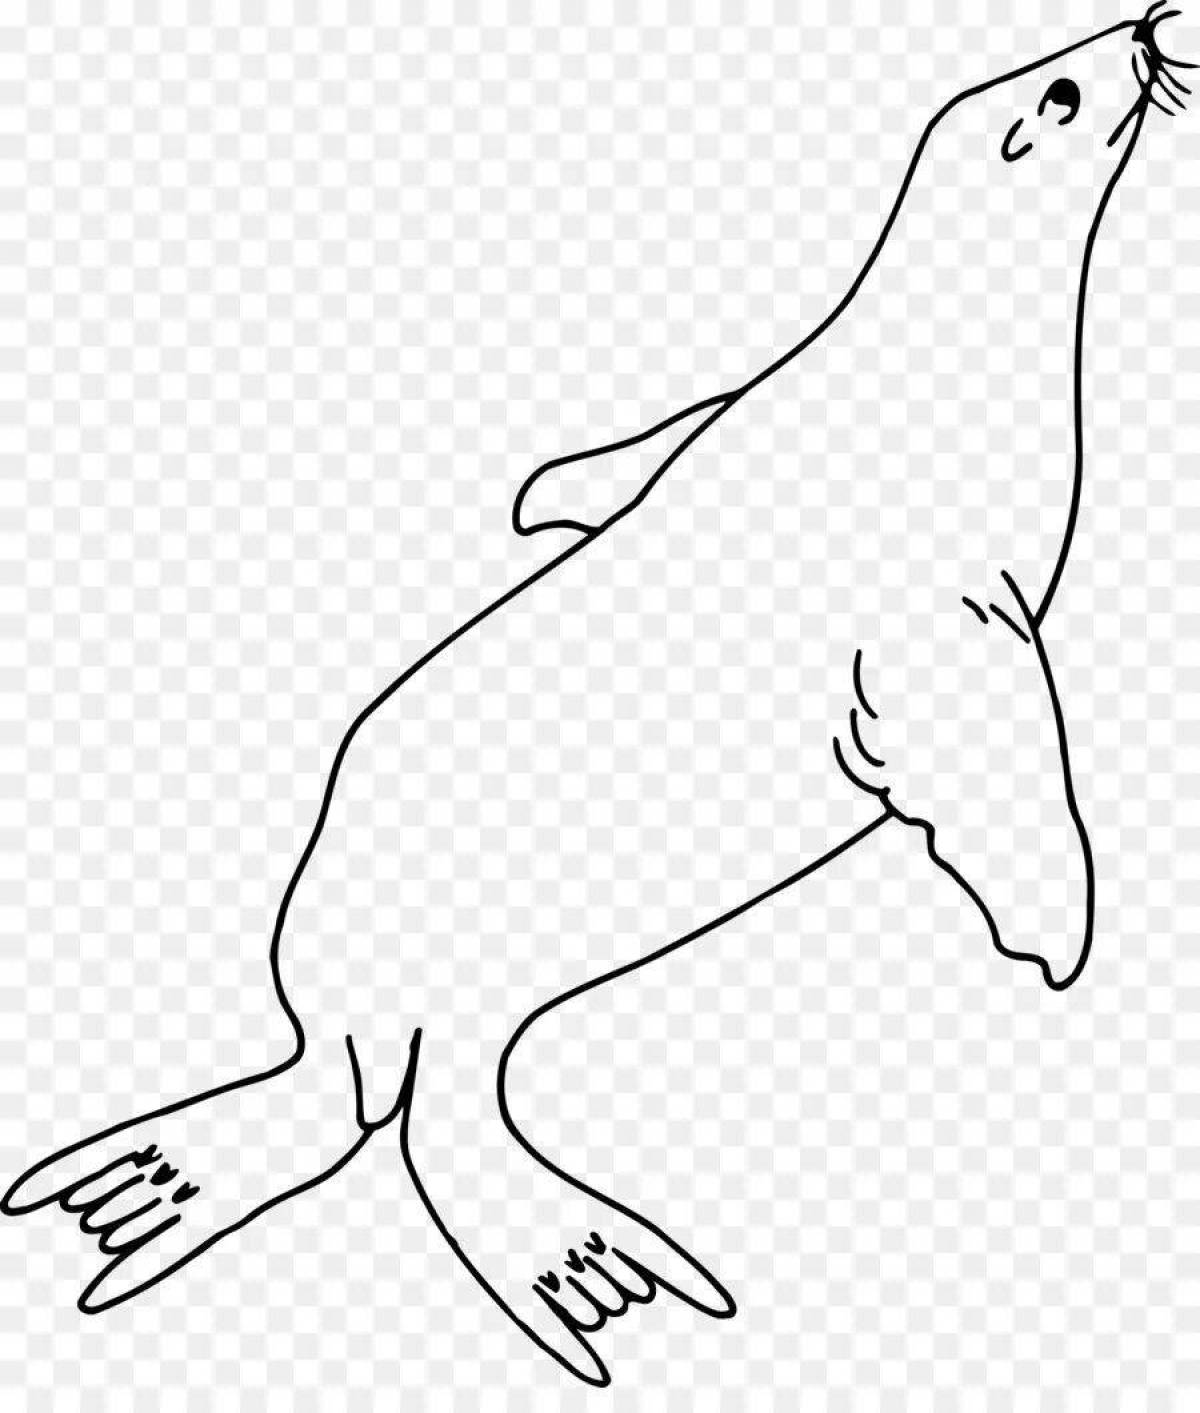 Coloring page funny sea lion